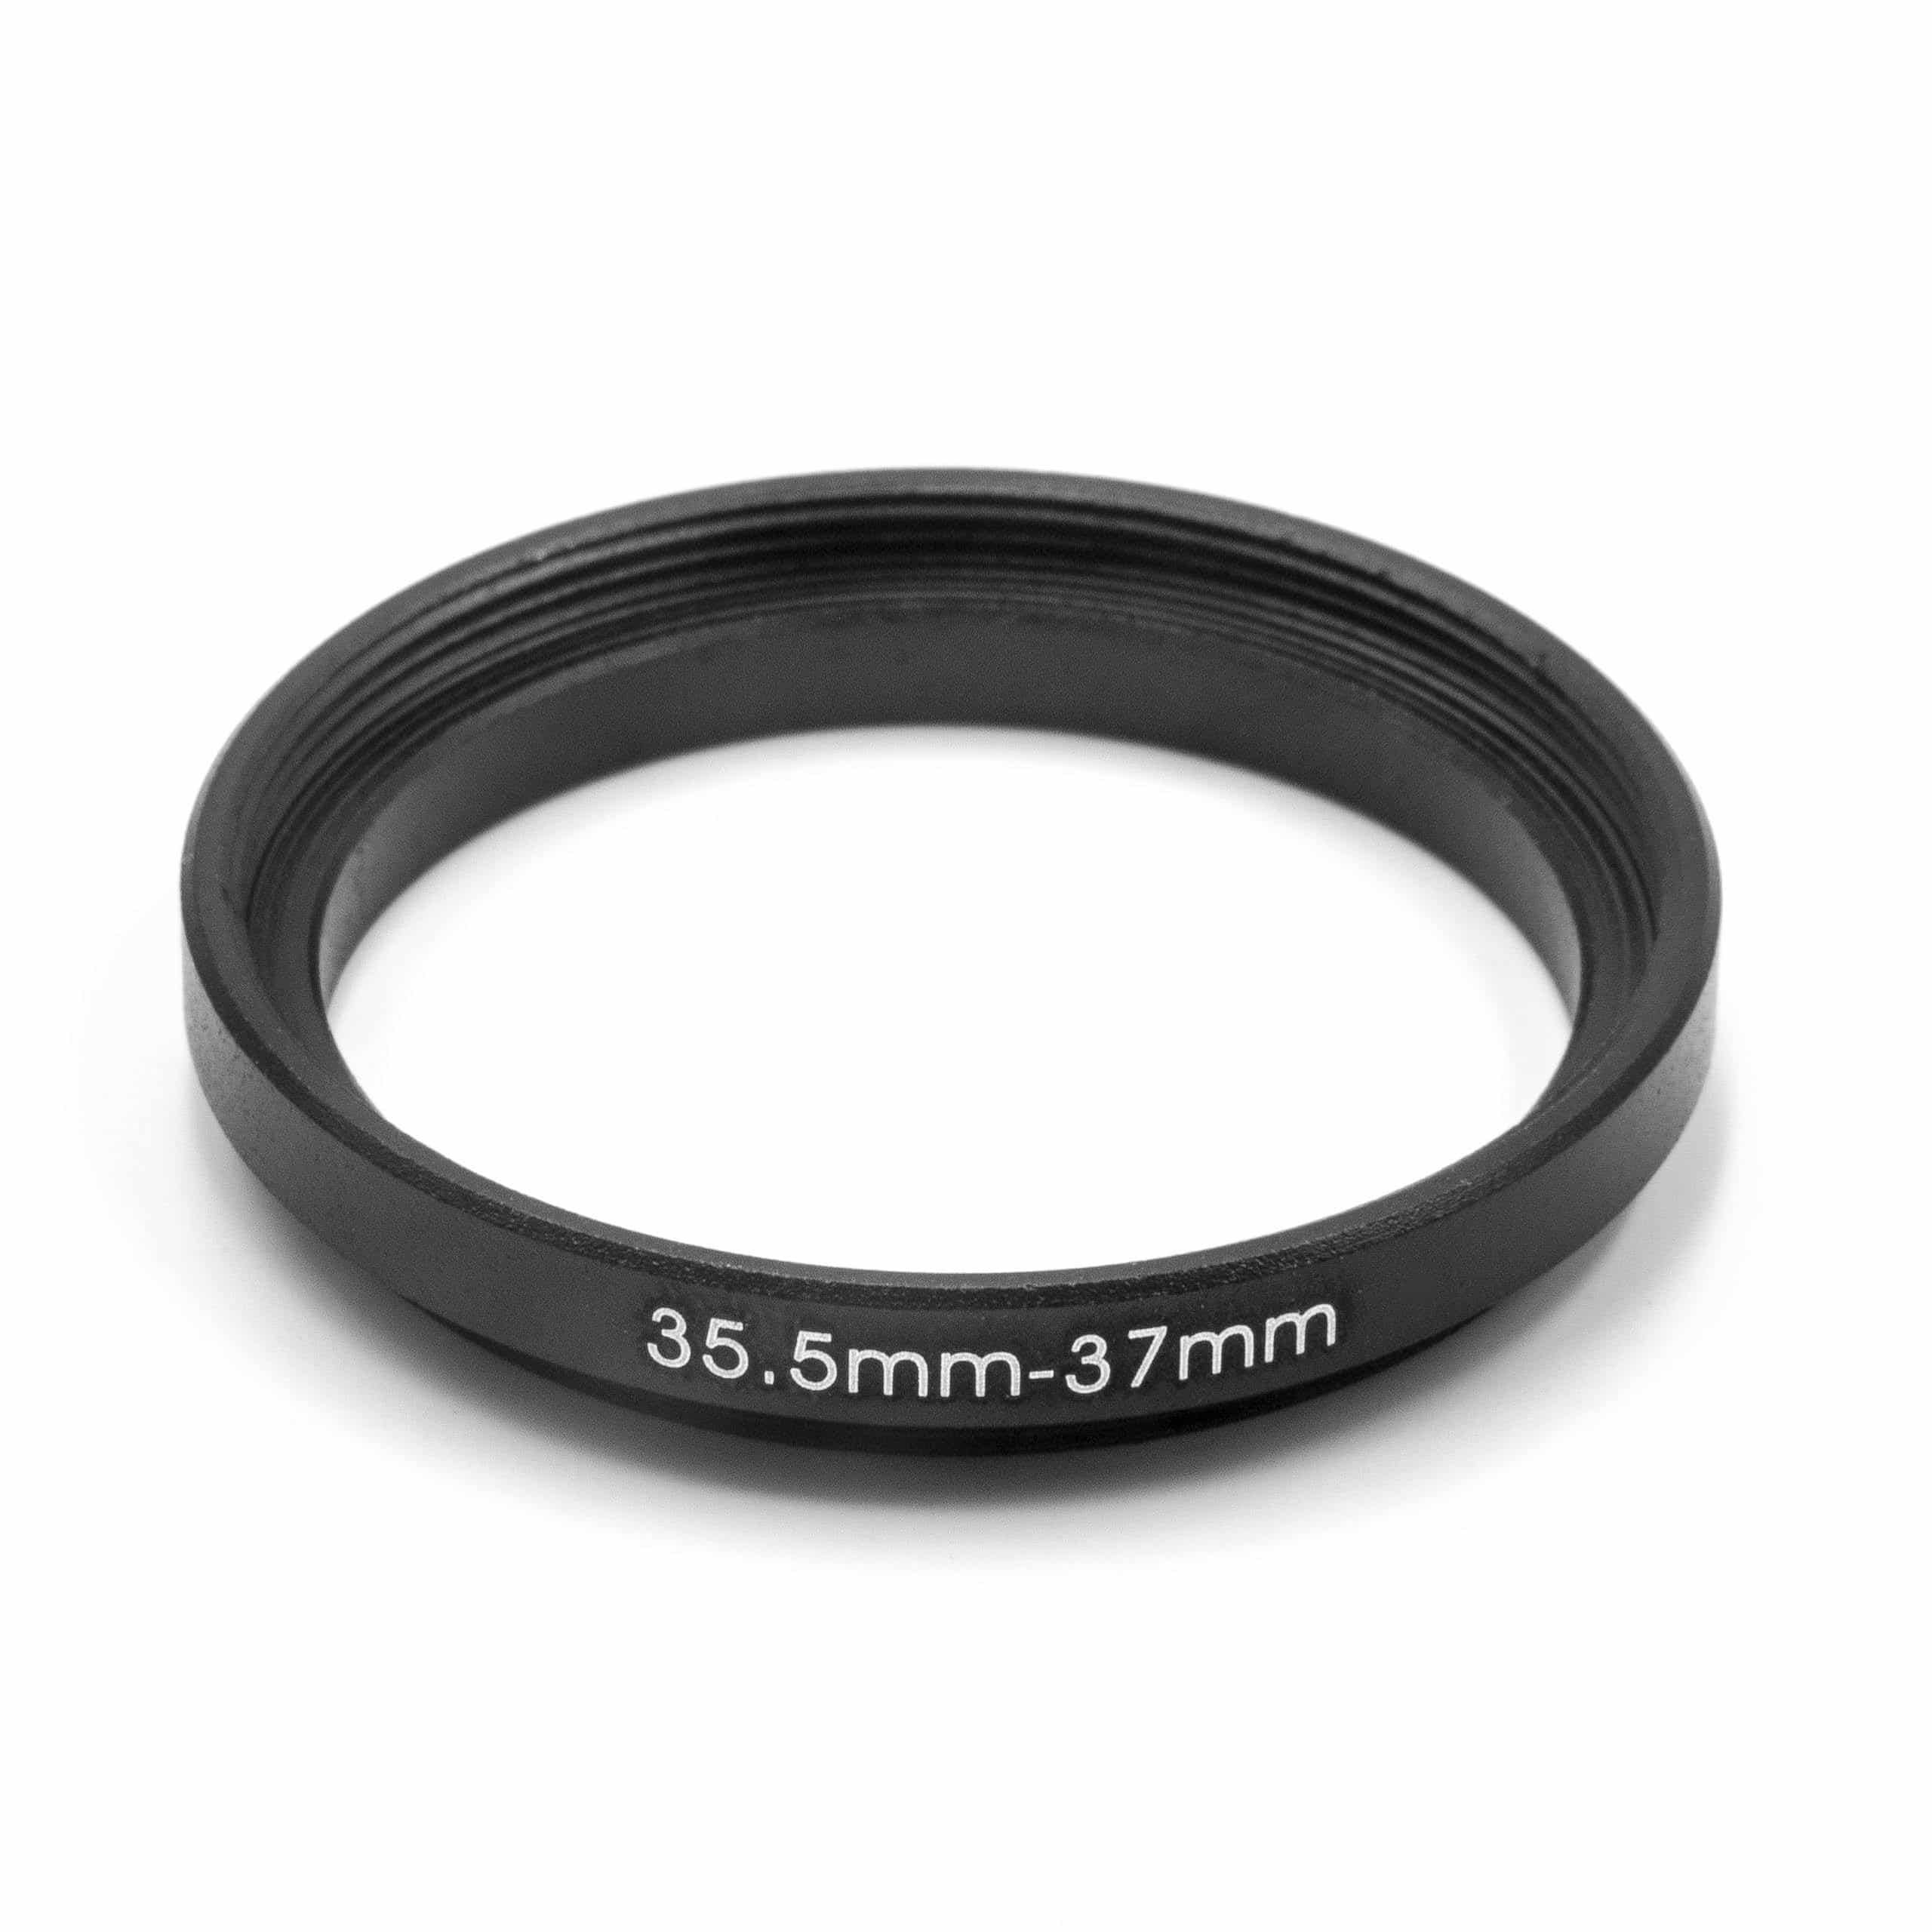 Step-Up Ring Adapter of 35.5 mm to 37 mmfor various Camera Lens - Filter Adapter